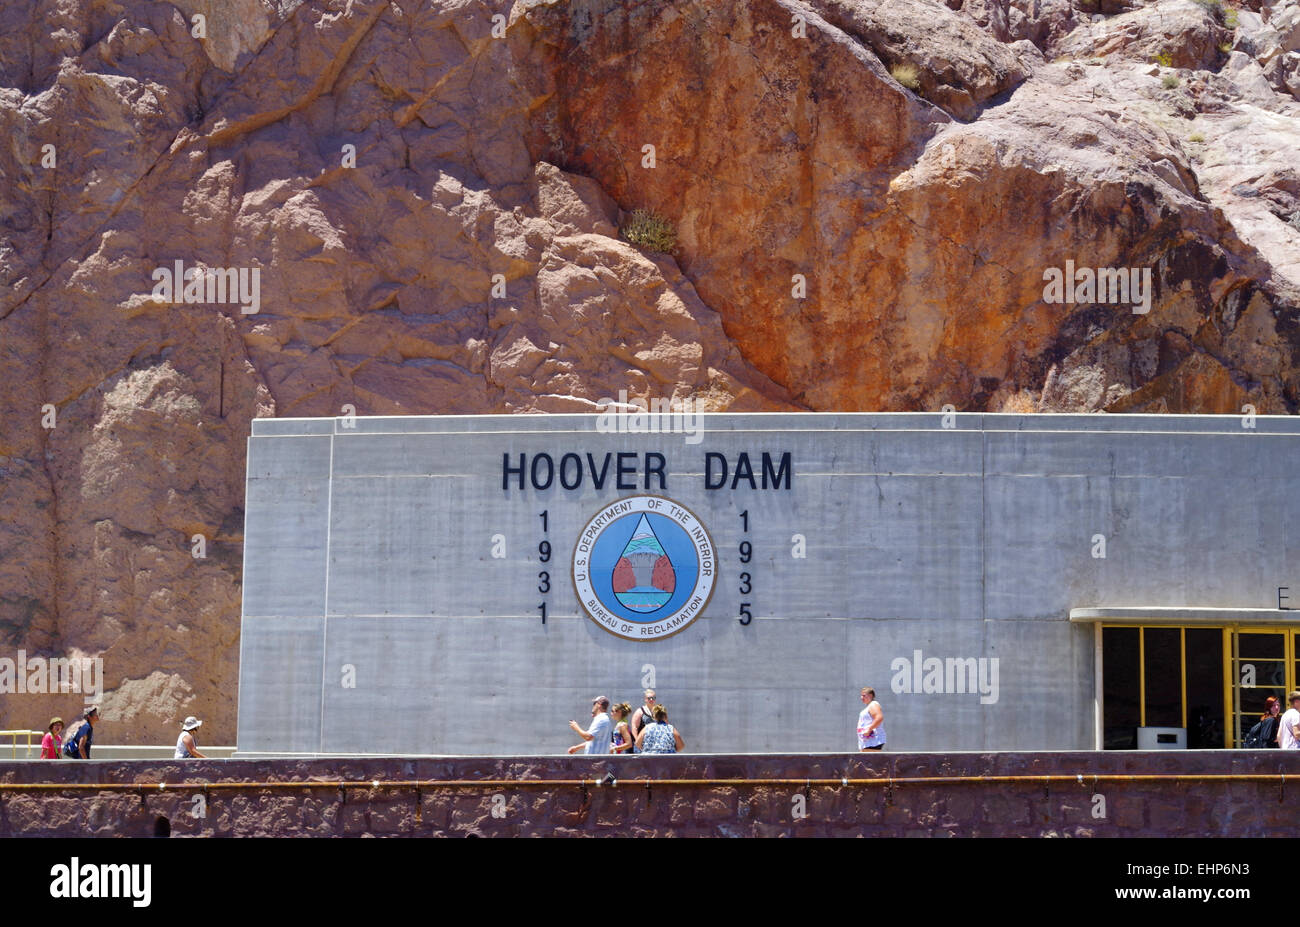 USA - Hoover Dam Banque D'Images